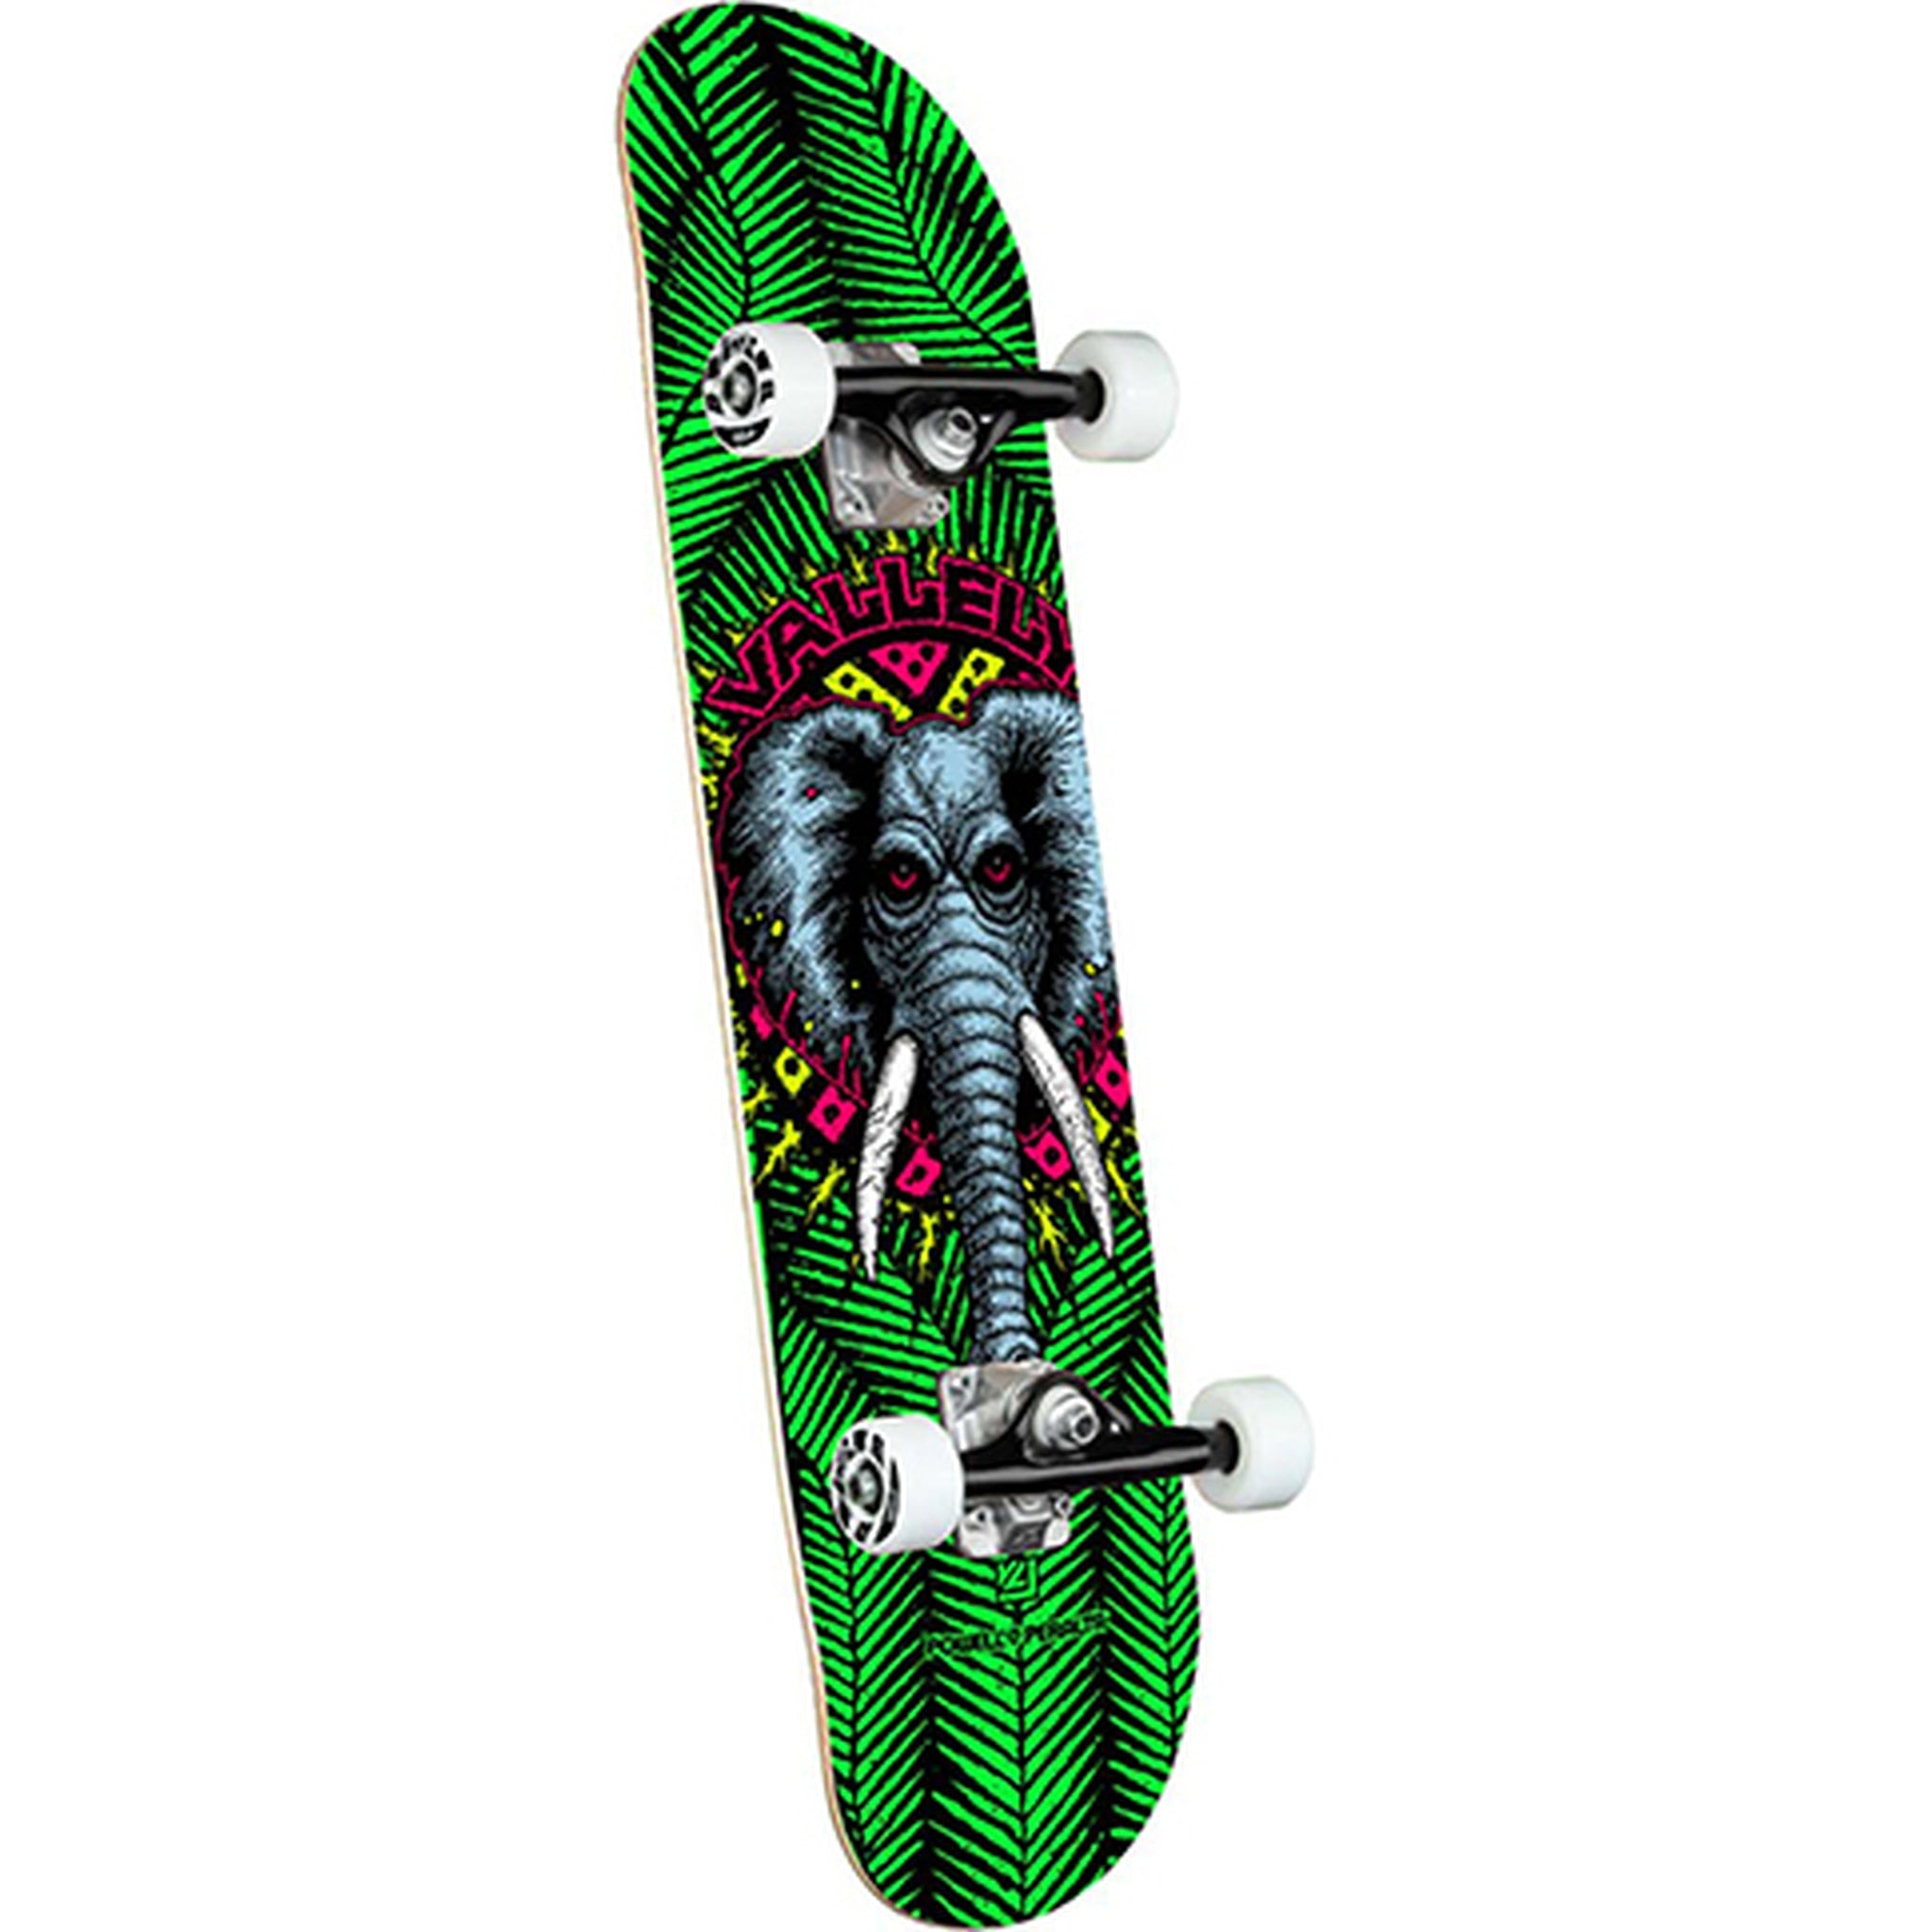 Green 8.0" Mike Vallely Powell Peralta Elephant Complete Skateboard